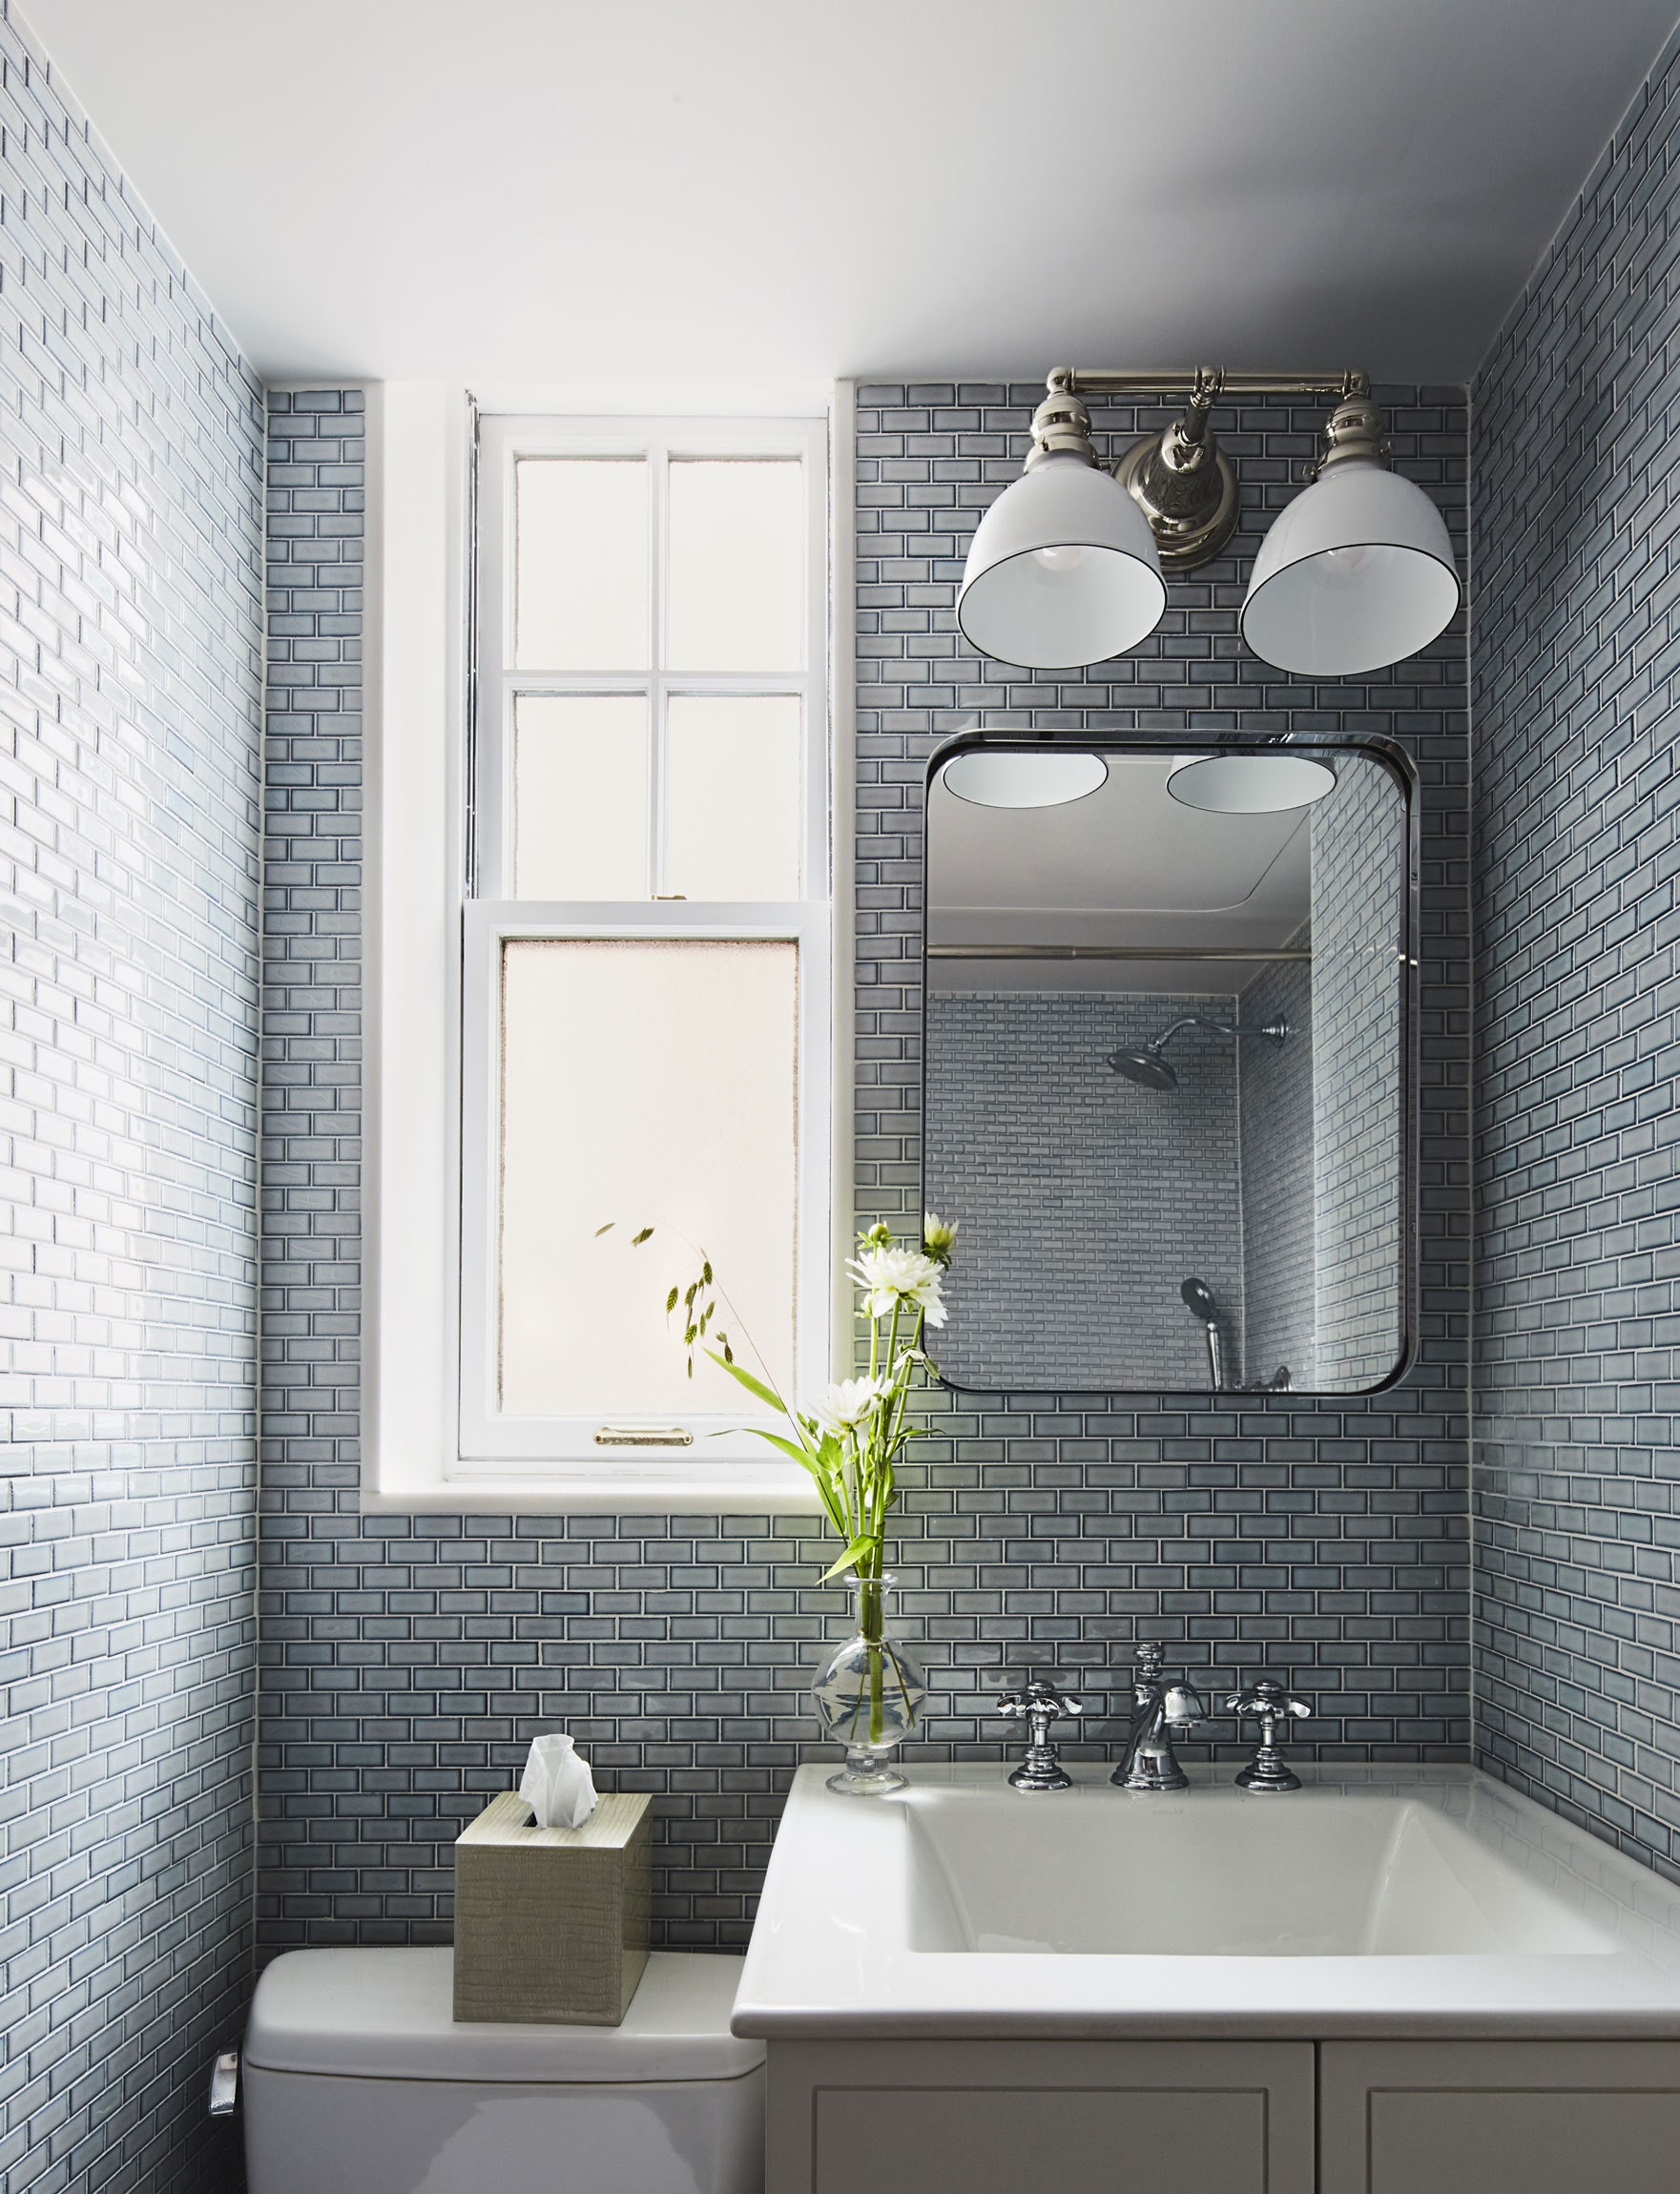 Tile Designs For Bathrooms
 This Bathroom Tile Design Idea Changes Everything